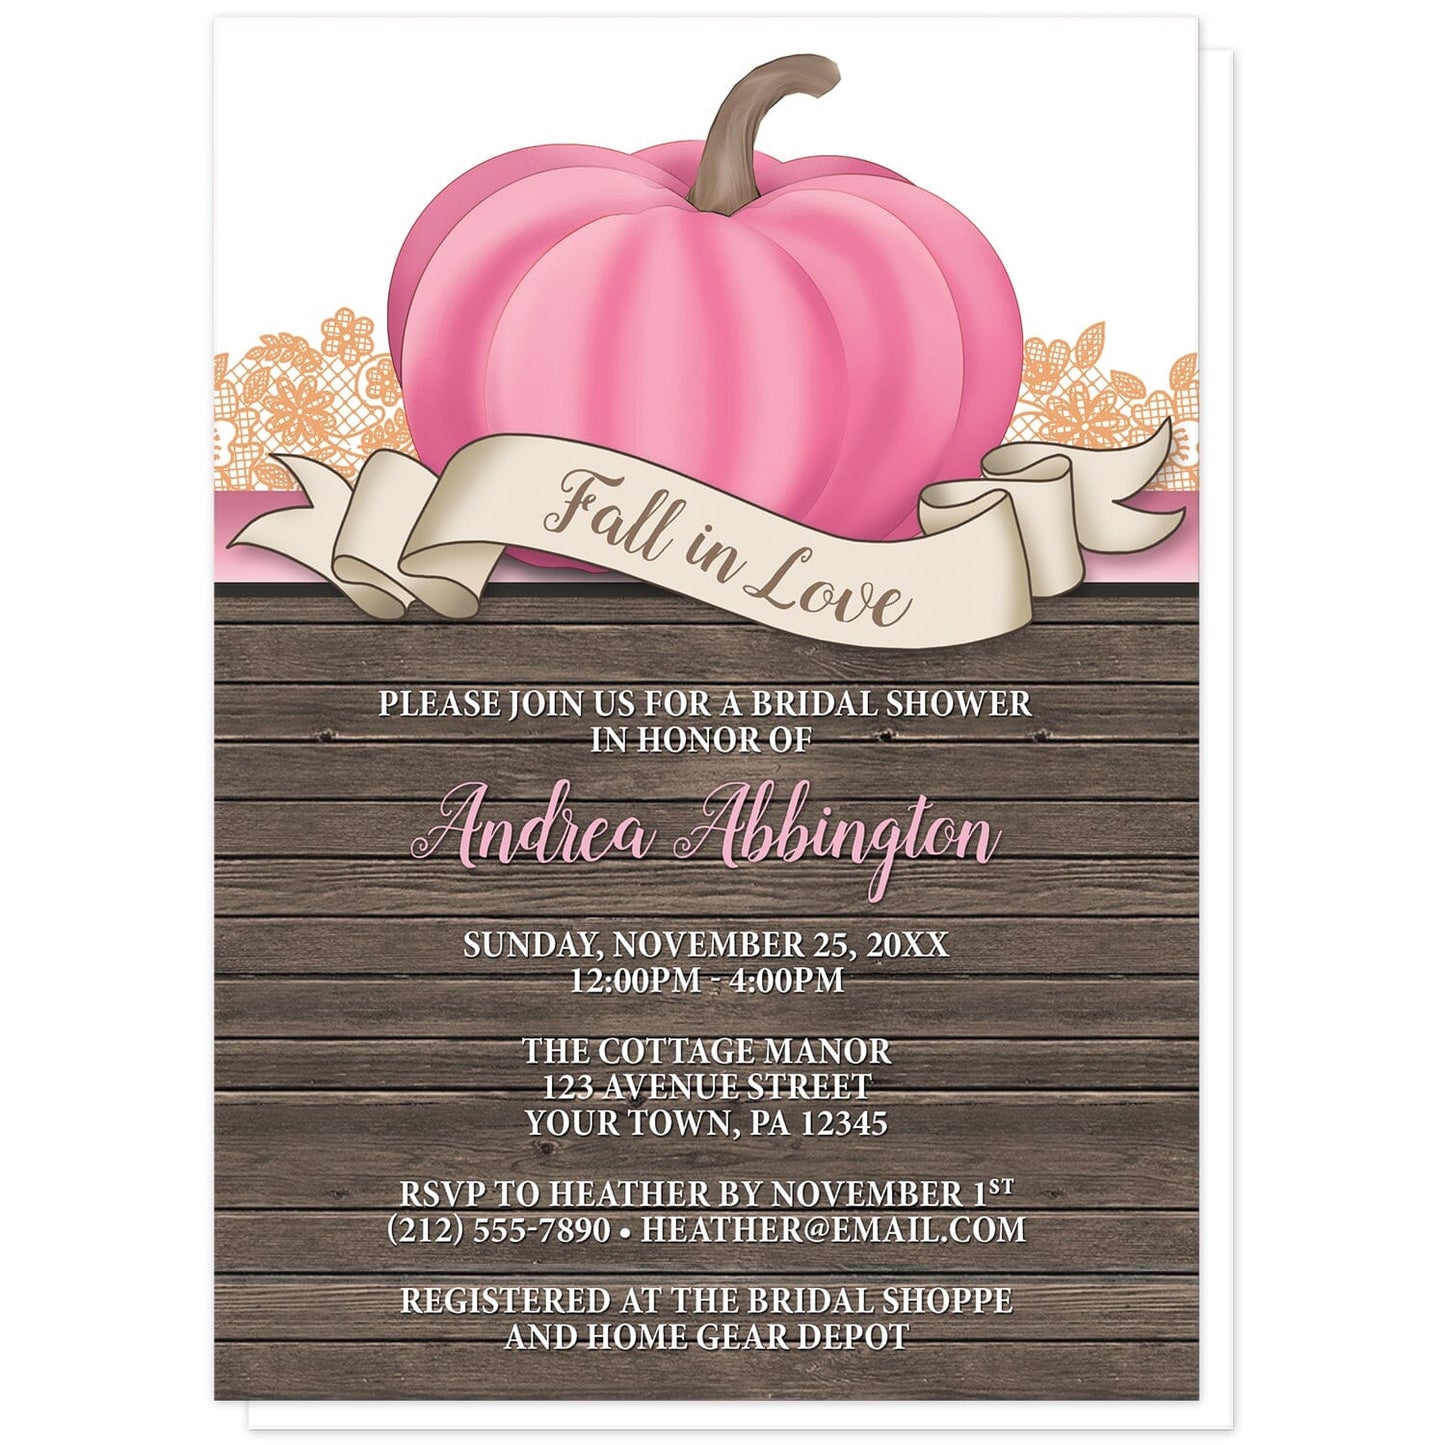 Rustic Pink Pumpkin Fall in Love Bridal Shower Invitations at Artistically Invited. Invites with an illustration of a large pink-colored pumpkin and a beige ribbon banner that reads: "Fall in Love". This unique pink pumpkin drawing stands on a horizontal pink stripe with orange lace behind it. The personalized bridal shower celebration details you provide will be custom printed in pink and white over a rustic wood background illustration below the pink pumpkin.